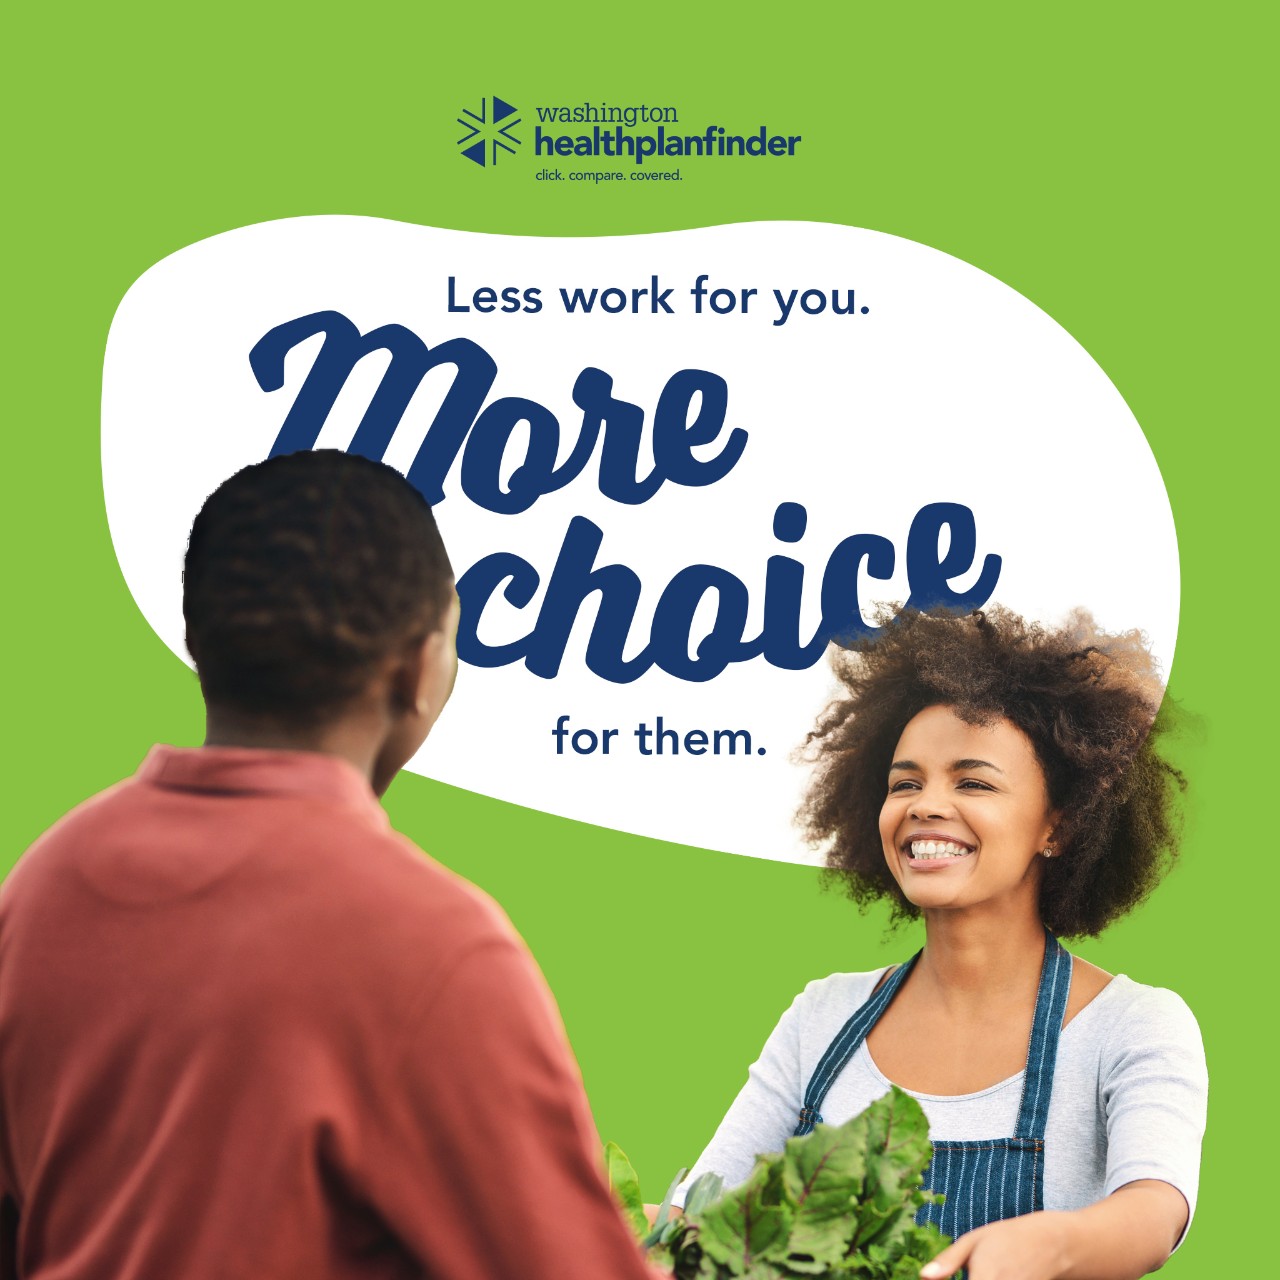 Washington Healthplanfinder. Less work for you. More choice for them. 